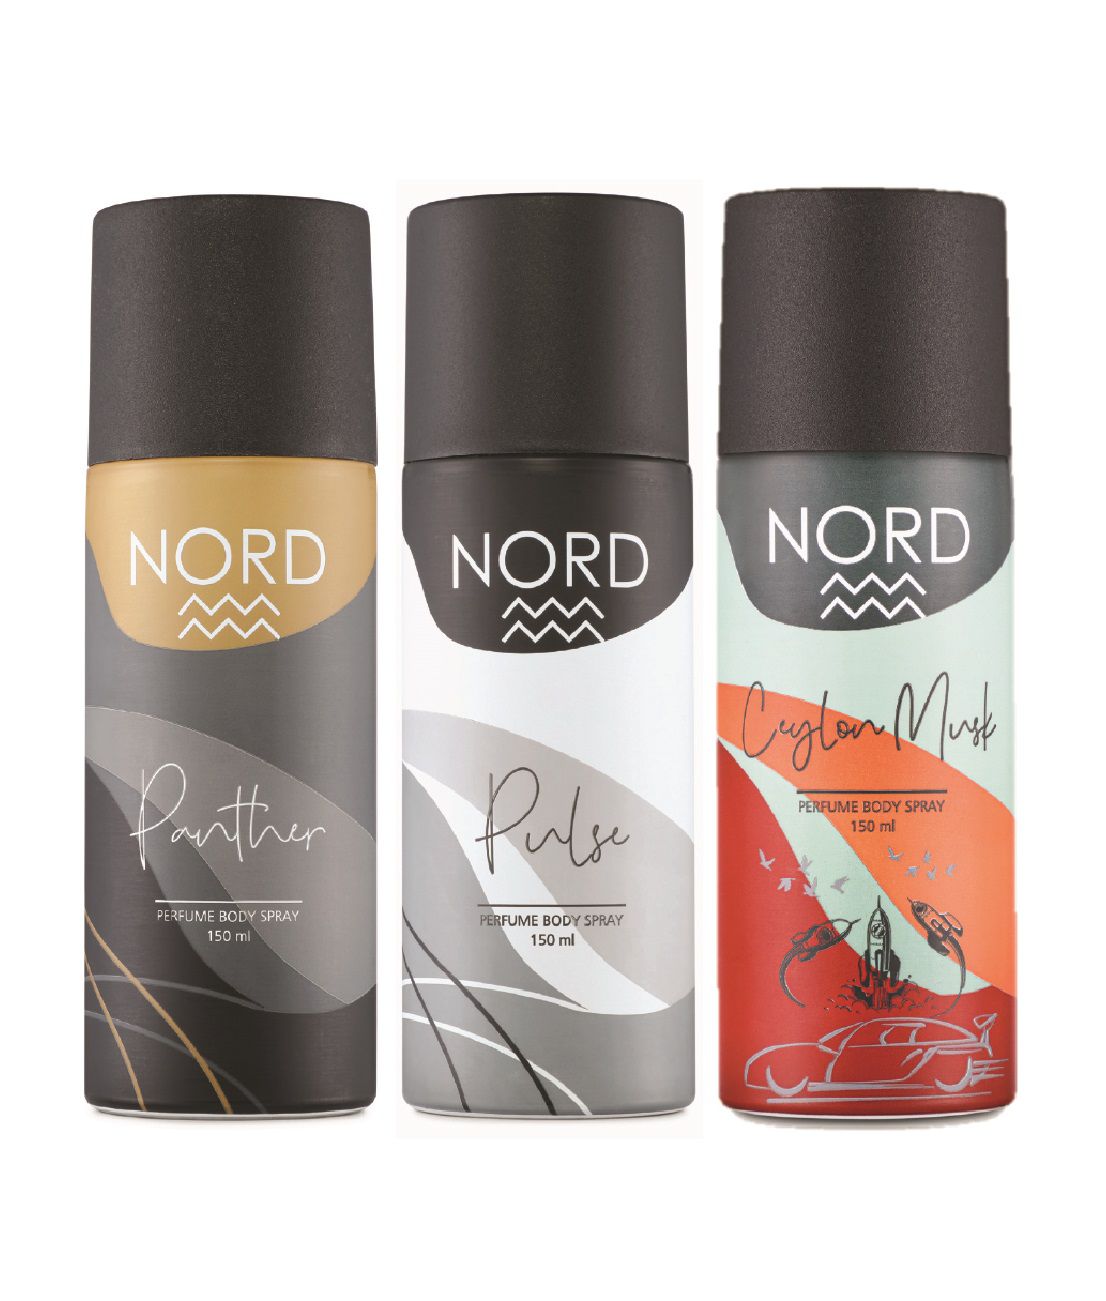     			NORD Deodorant Body Spray - Panther, Pulse and Ceylon Musk 150 ml each (Pack of 3)